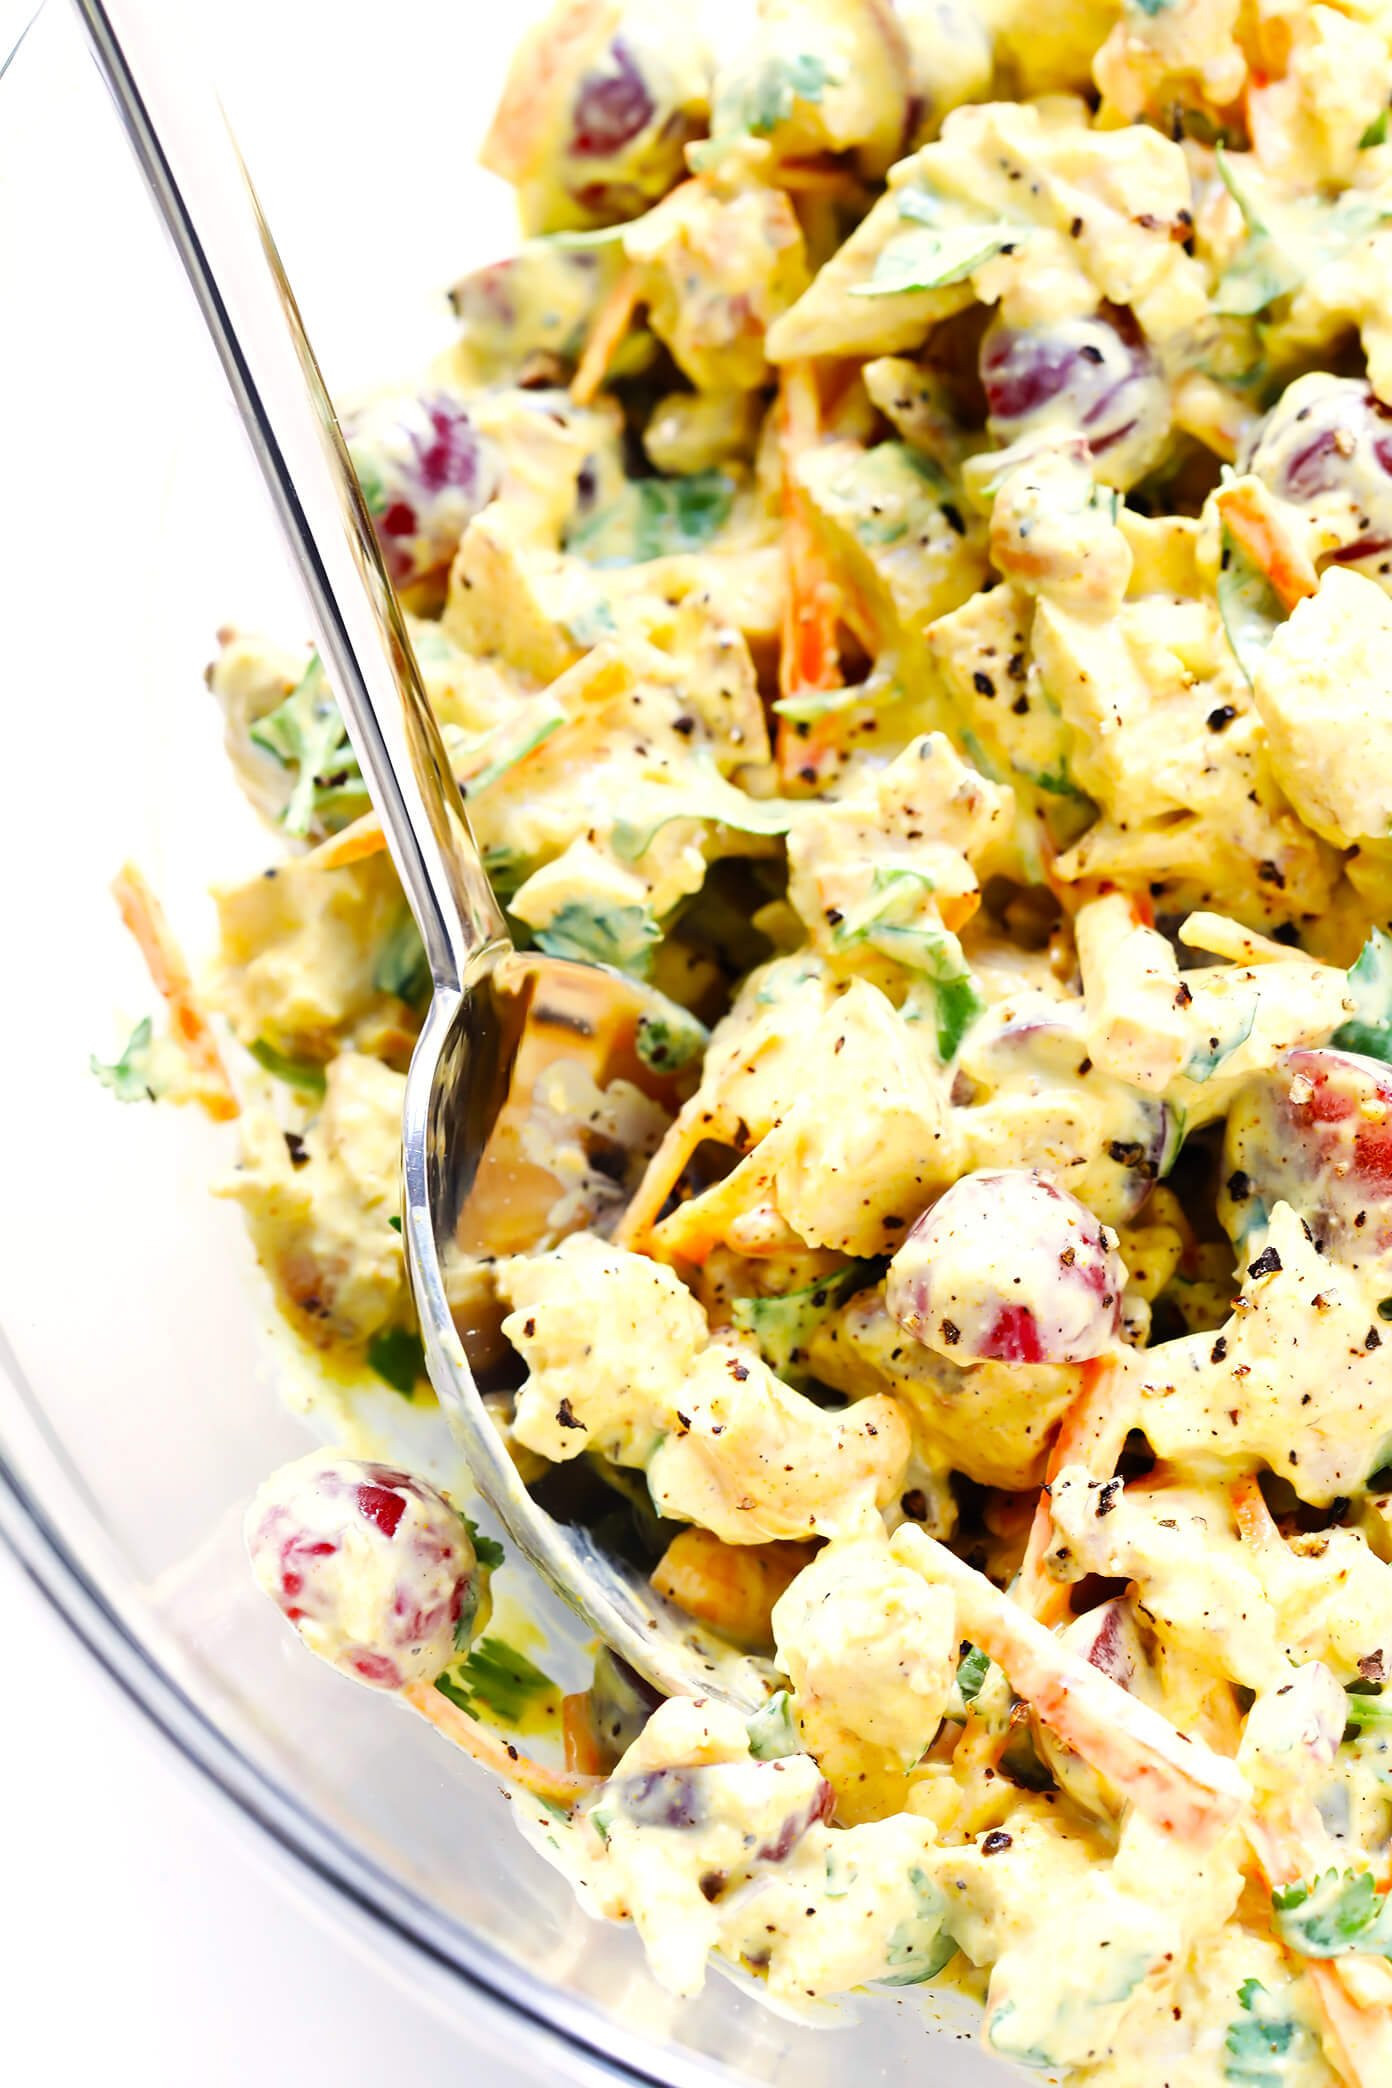 Curried Chicken Salad Beautiful Healthy Curry Chicken Salad